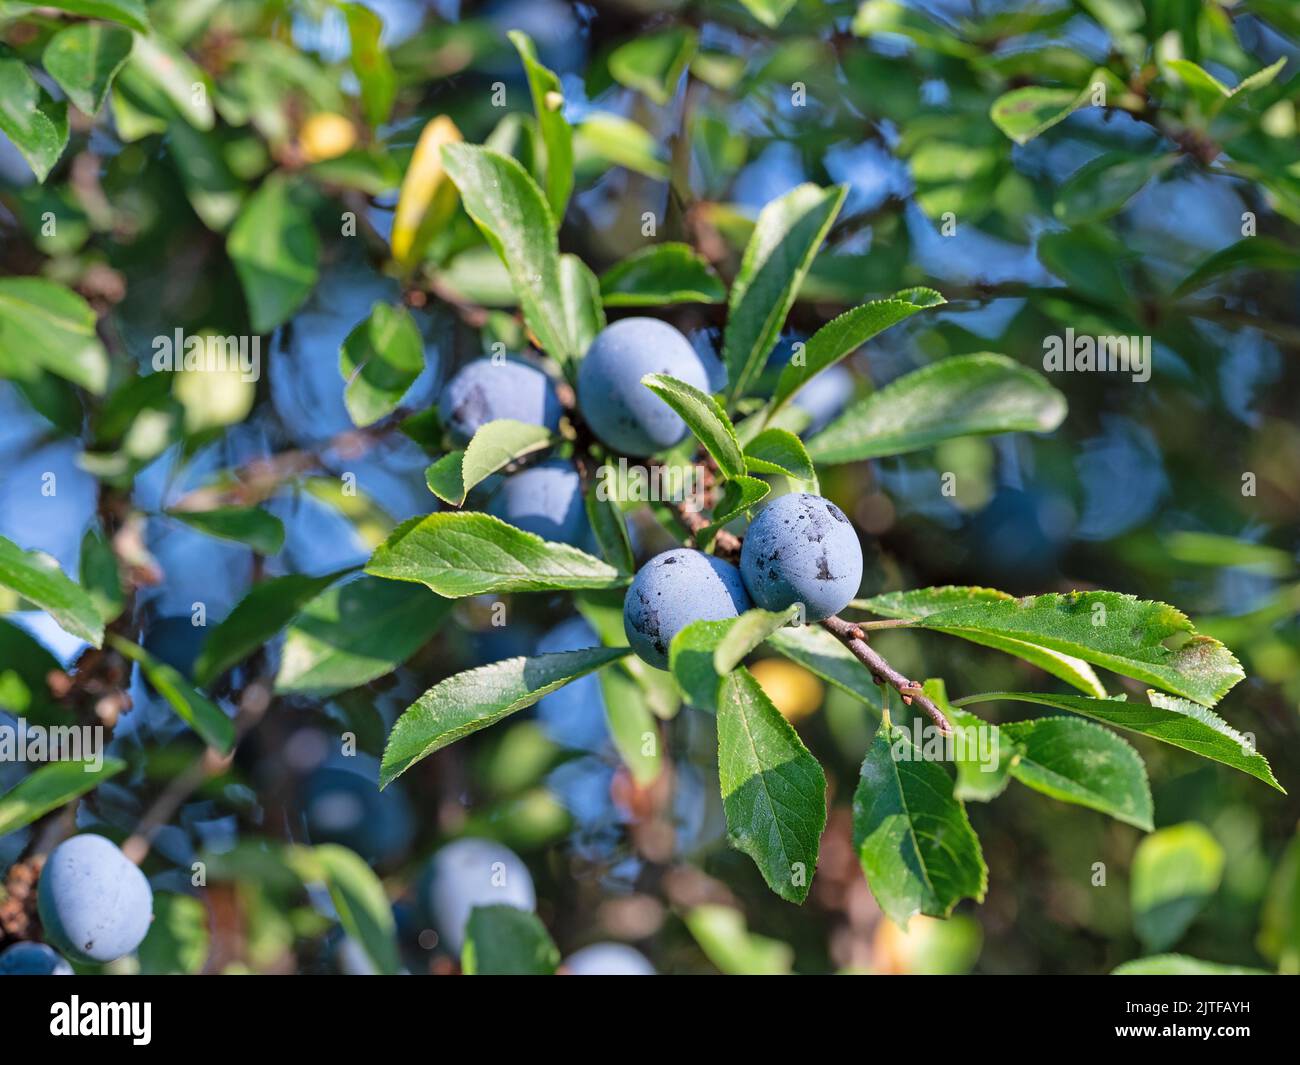 Ripe blackthorn fruits in a close-up Stock Photo